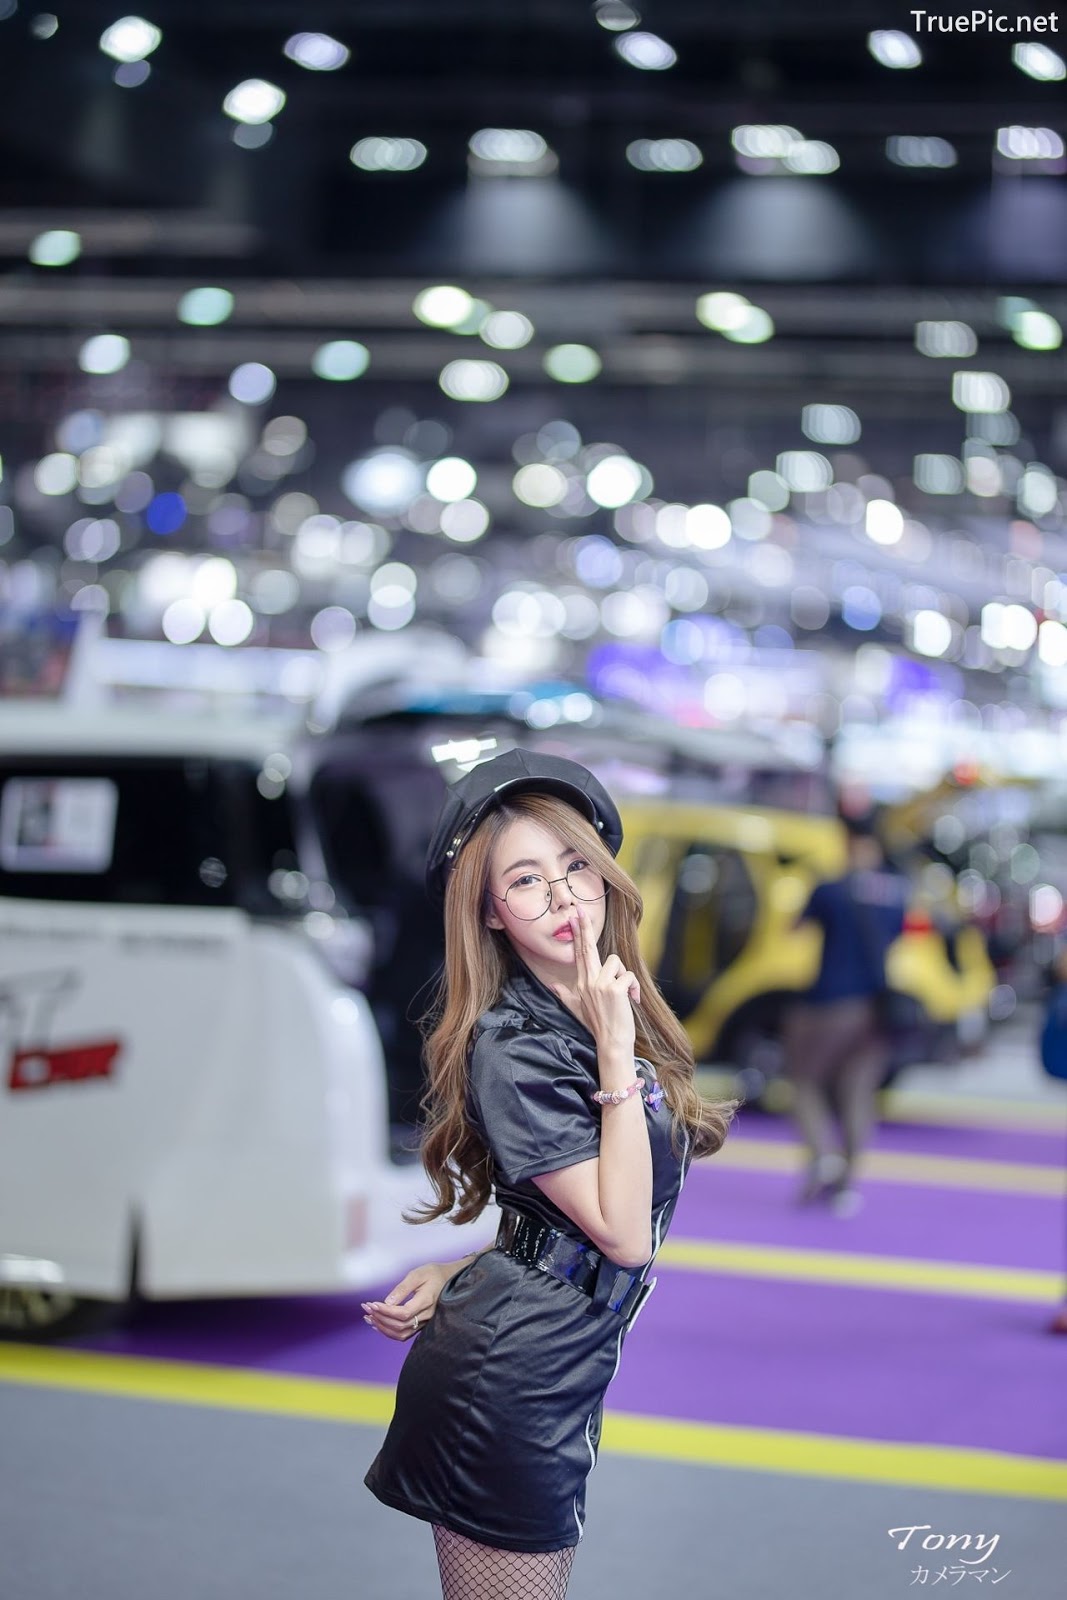 Image-Thailand-Hot-Model-Thai-Racing-Girl-At-Motor-Expo-2019-TruePic.net- Picture-100